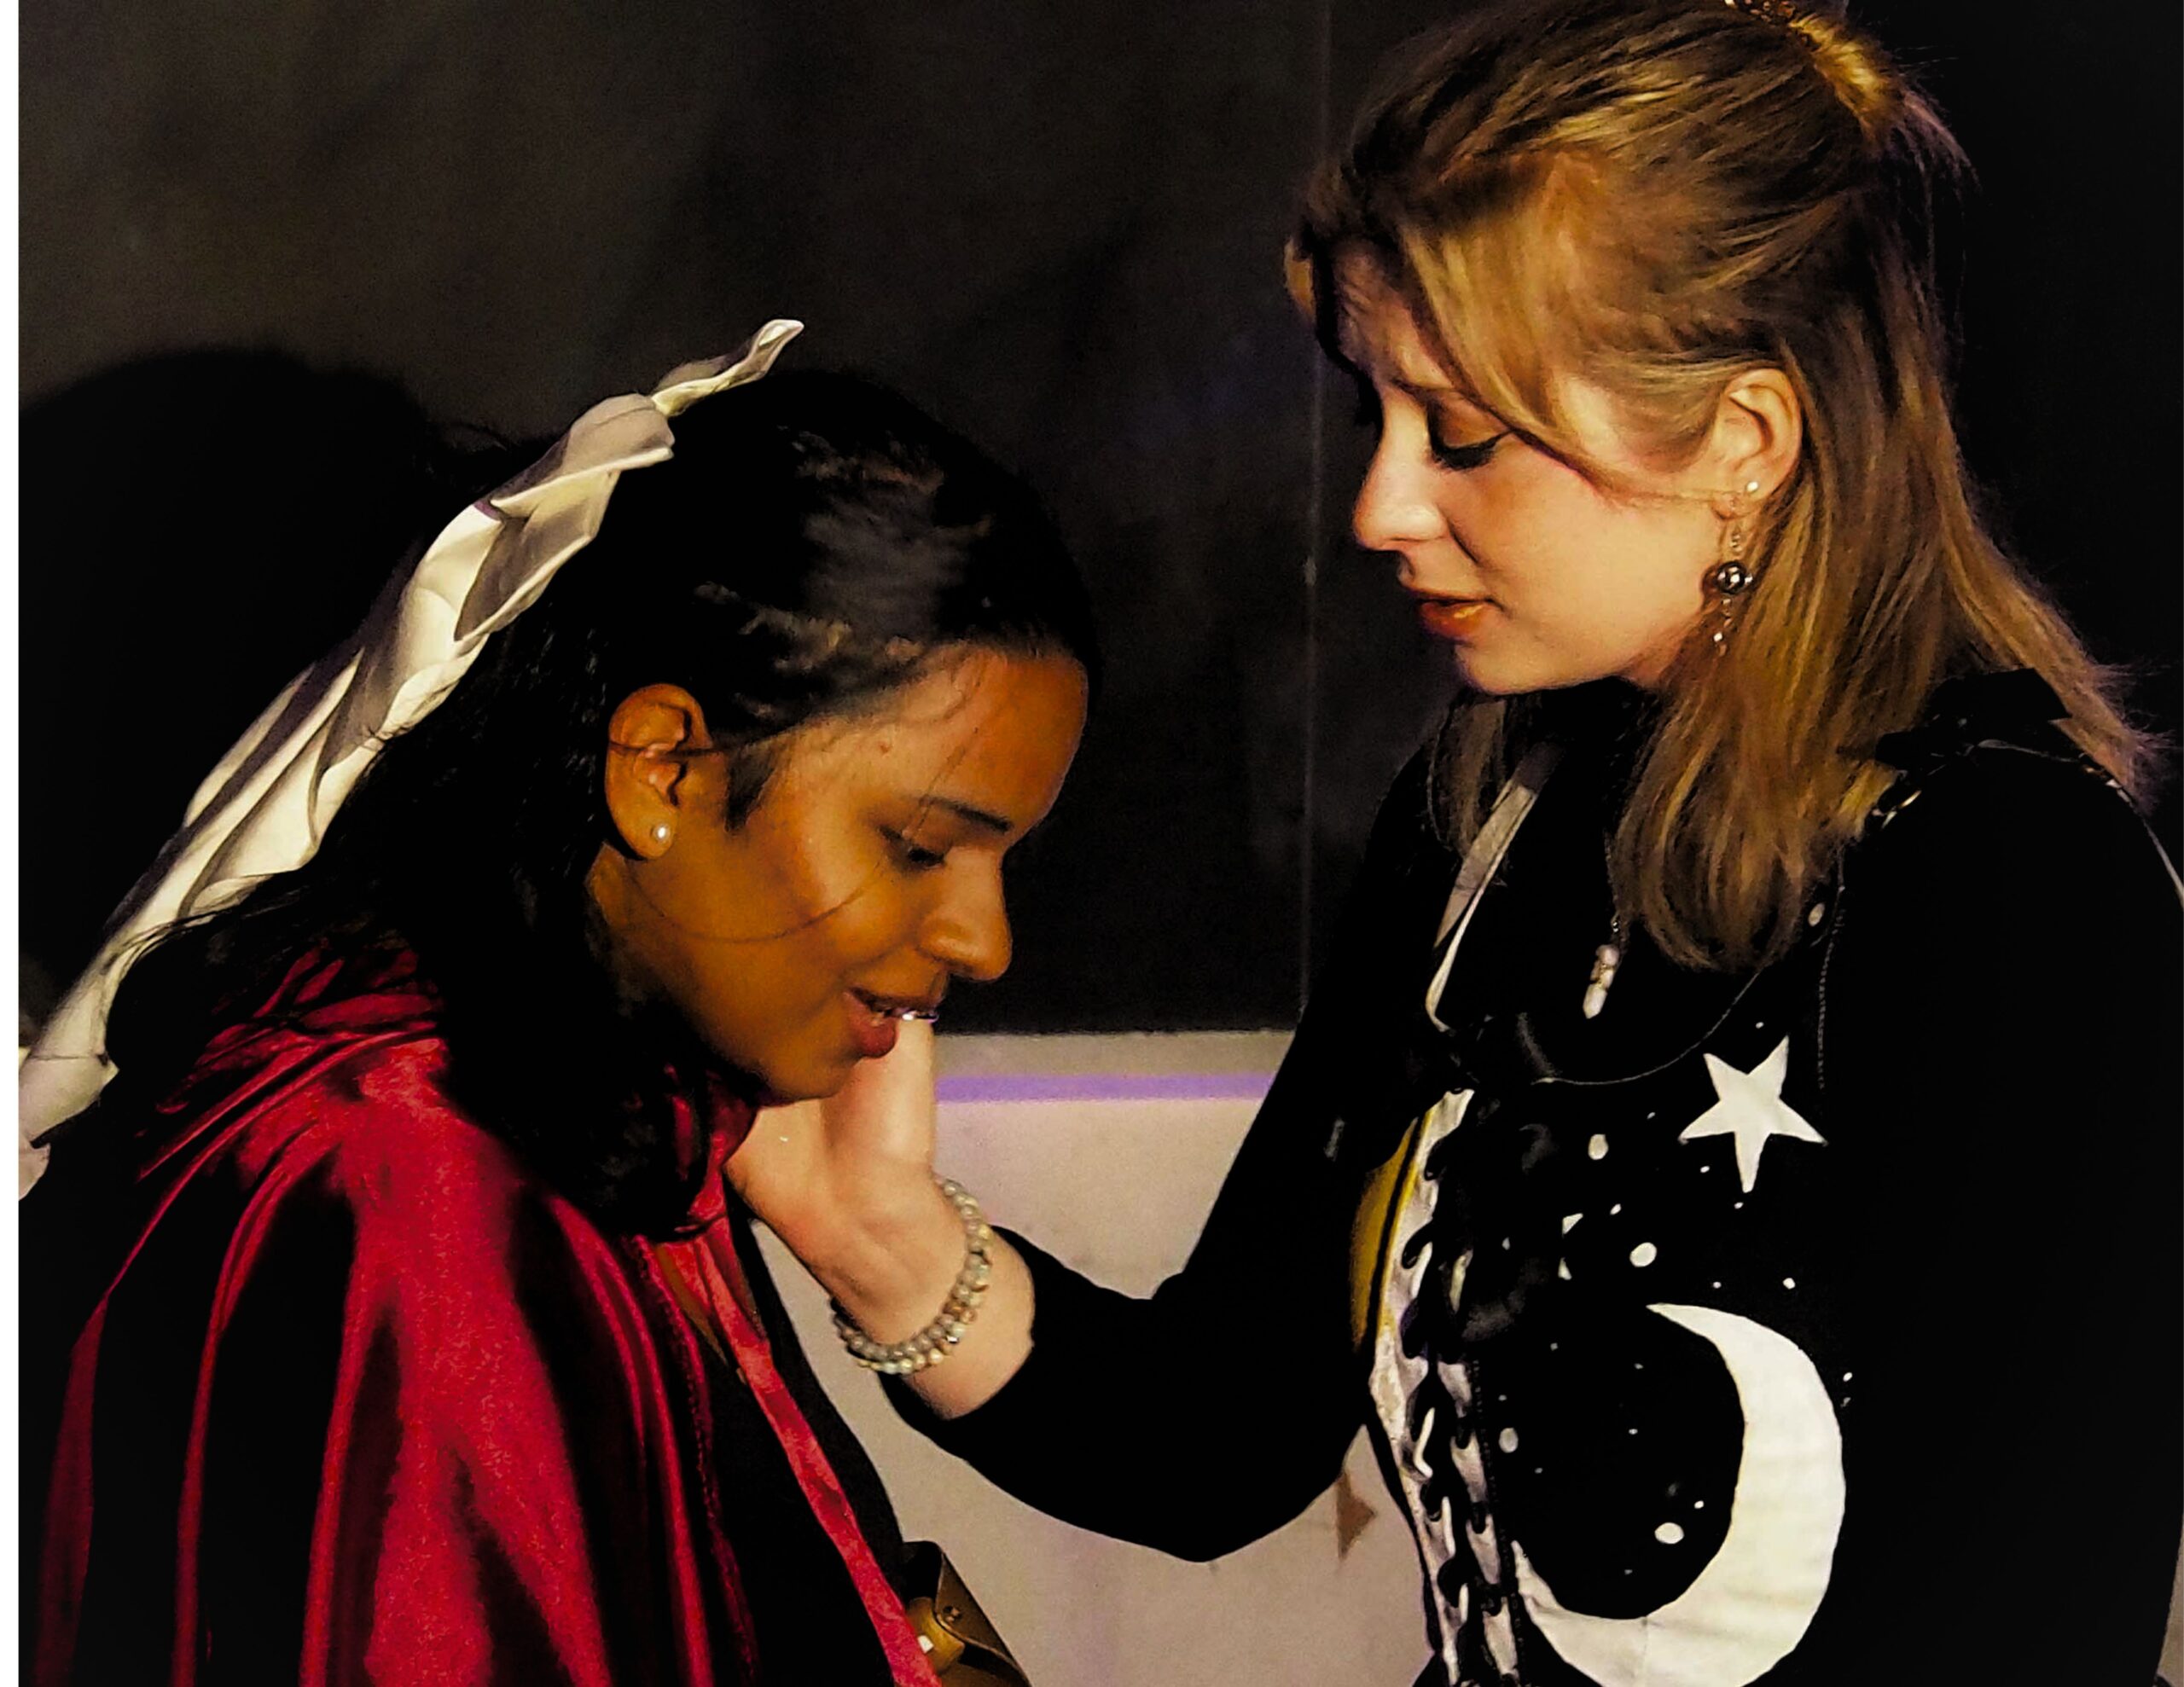 A person in a red cloak and golden hair tie speaks to a person in a black shirt with a moon and stars on it.